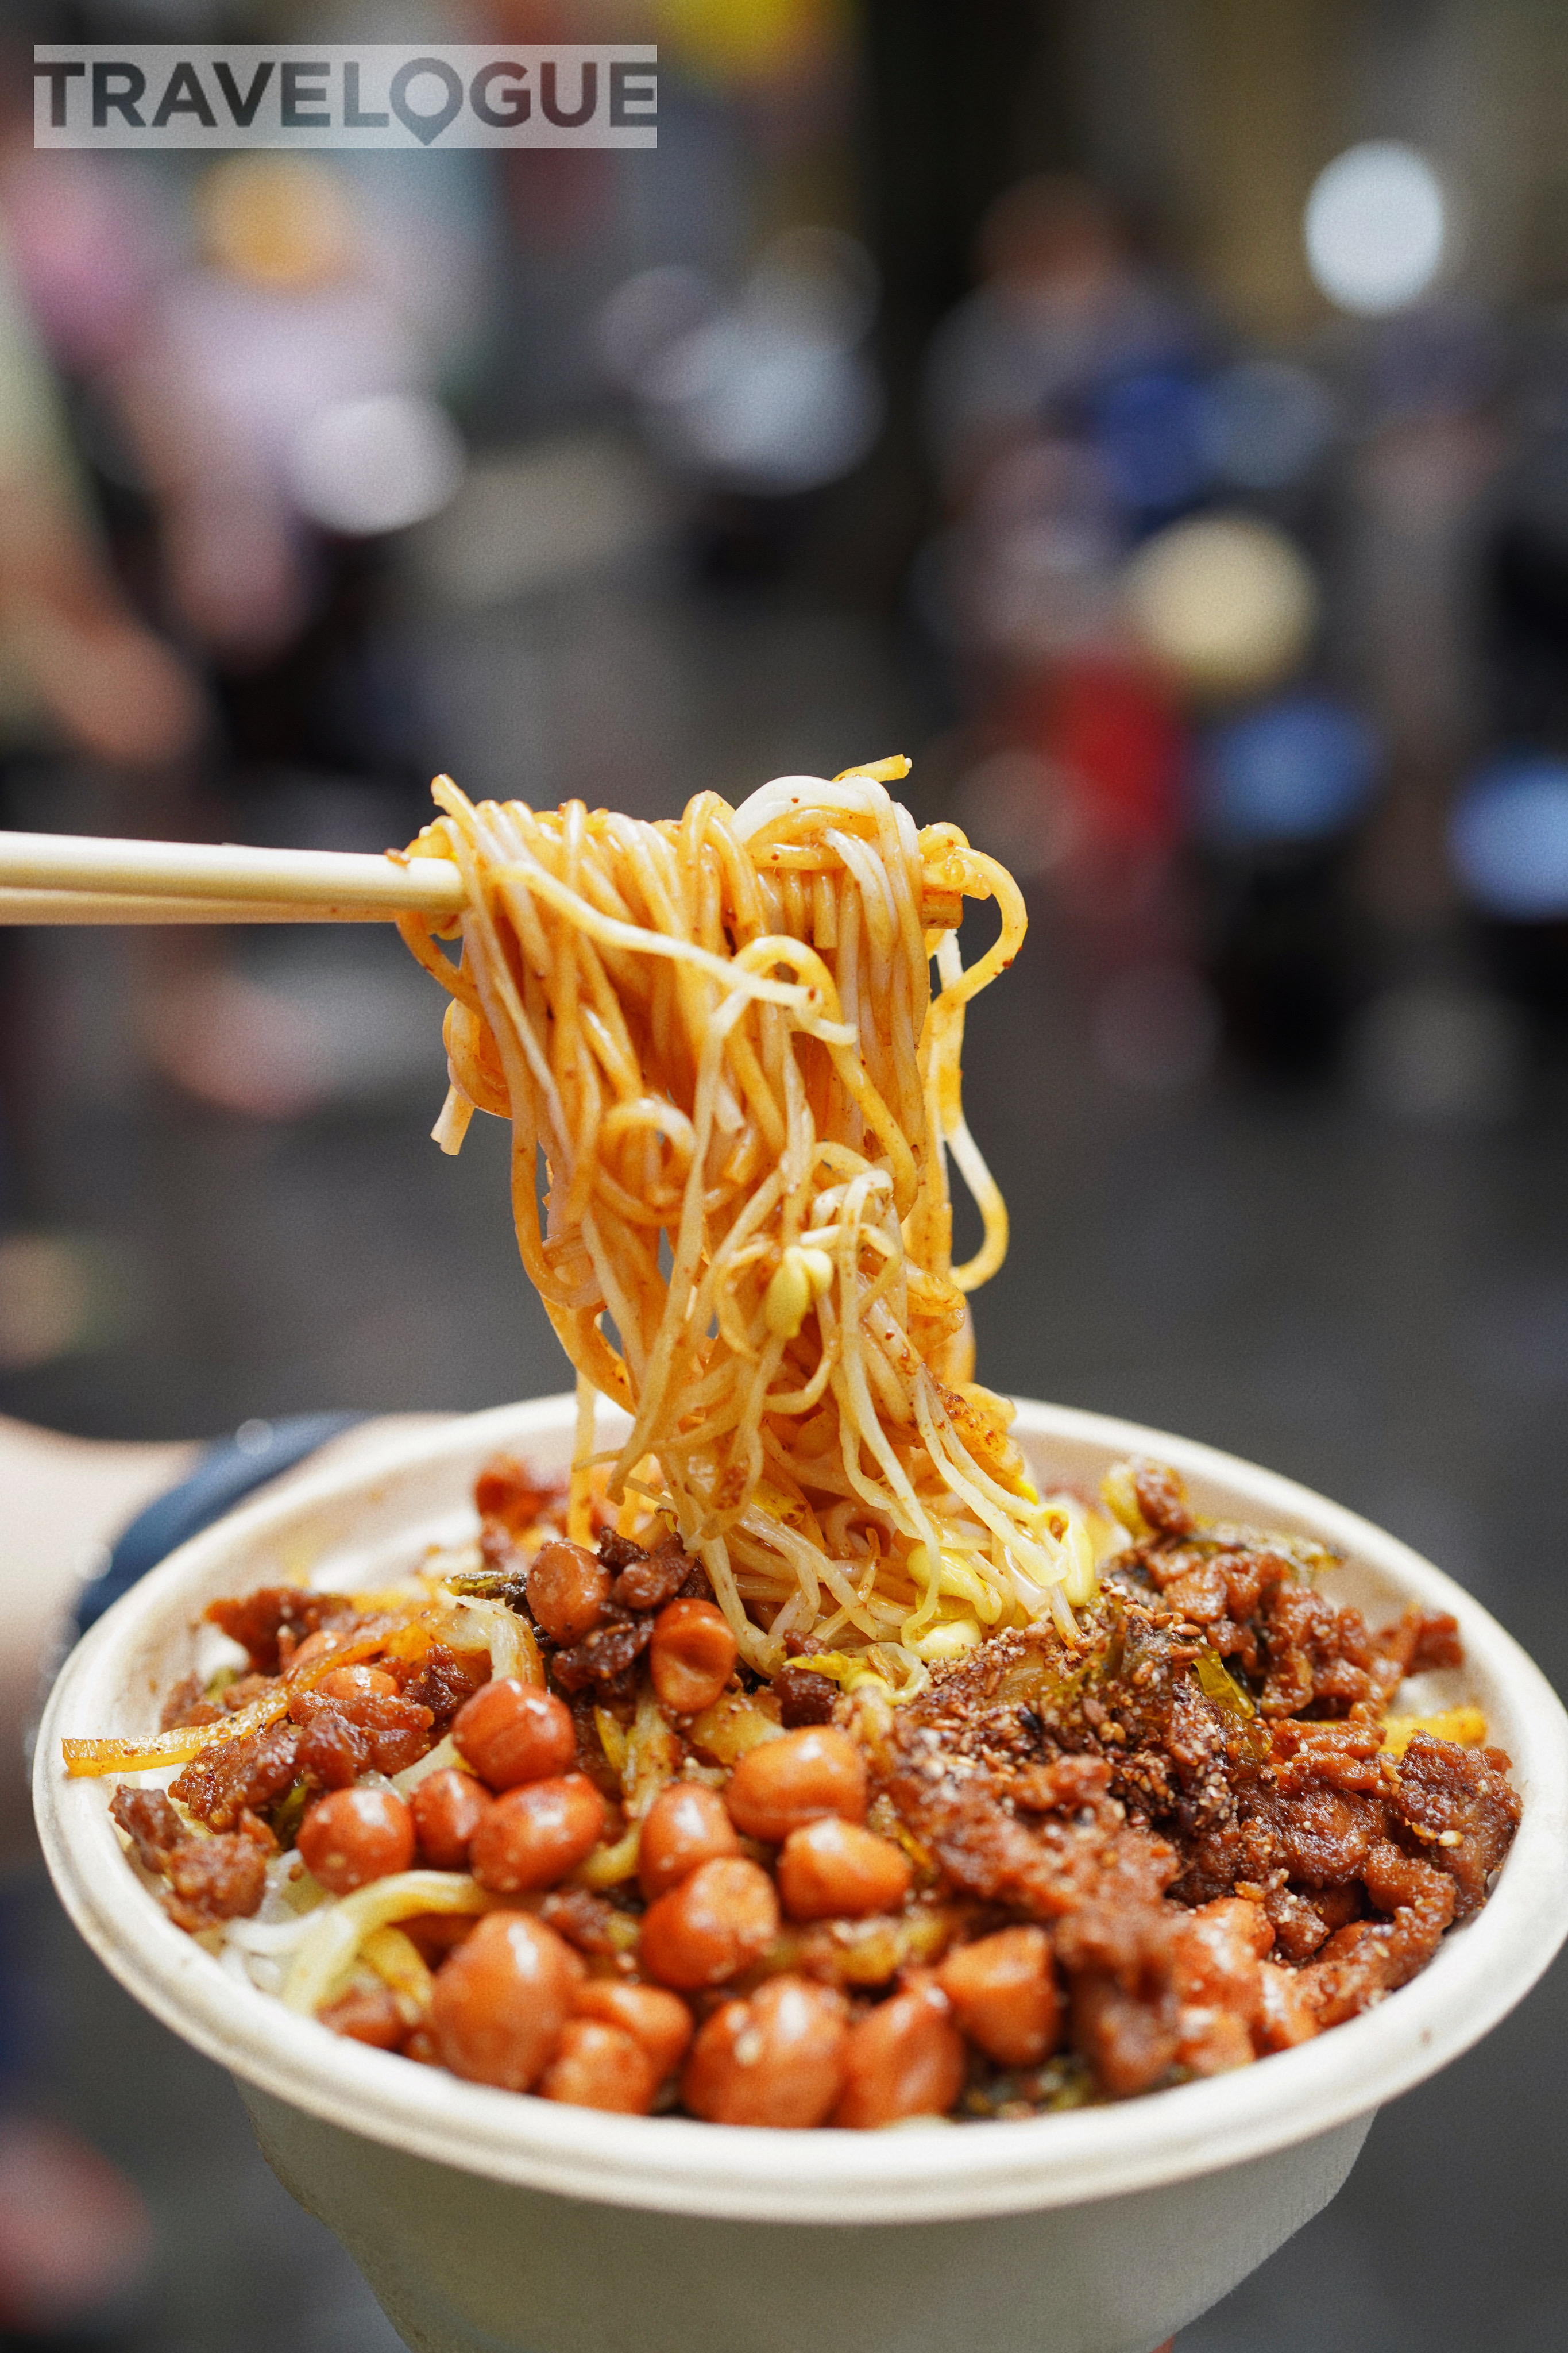 Hainan rice noodles are famous for how thin they are. People often describe them as being no thicker than a human hair. Noodle-lovers who like to spice things up can add a spoonful of hot sauce to further whet their appetites. /CGTN